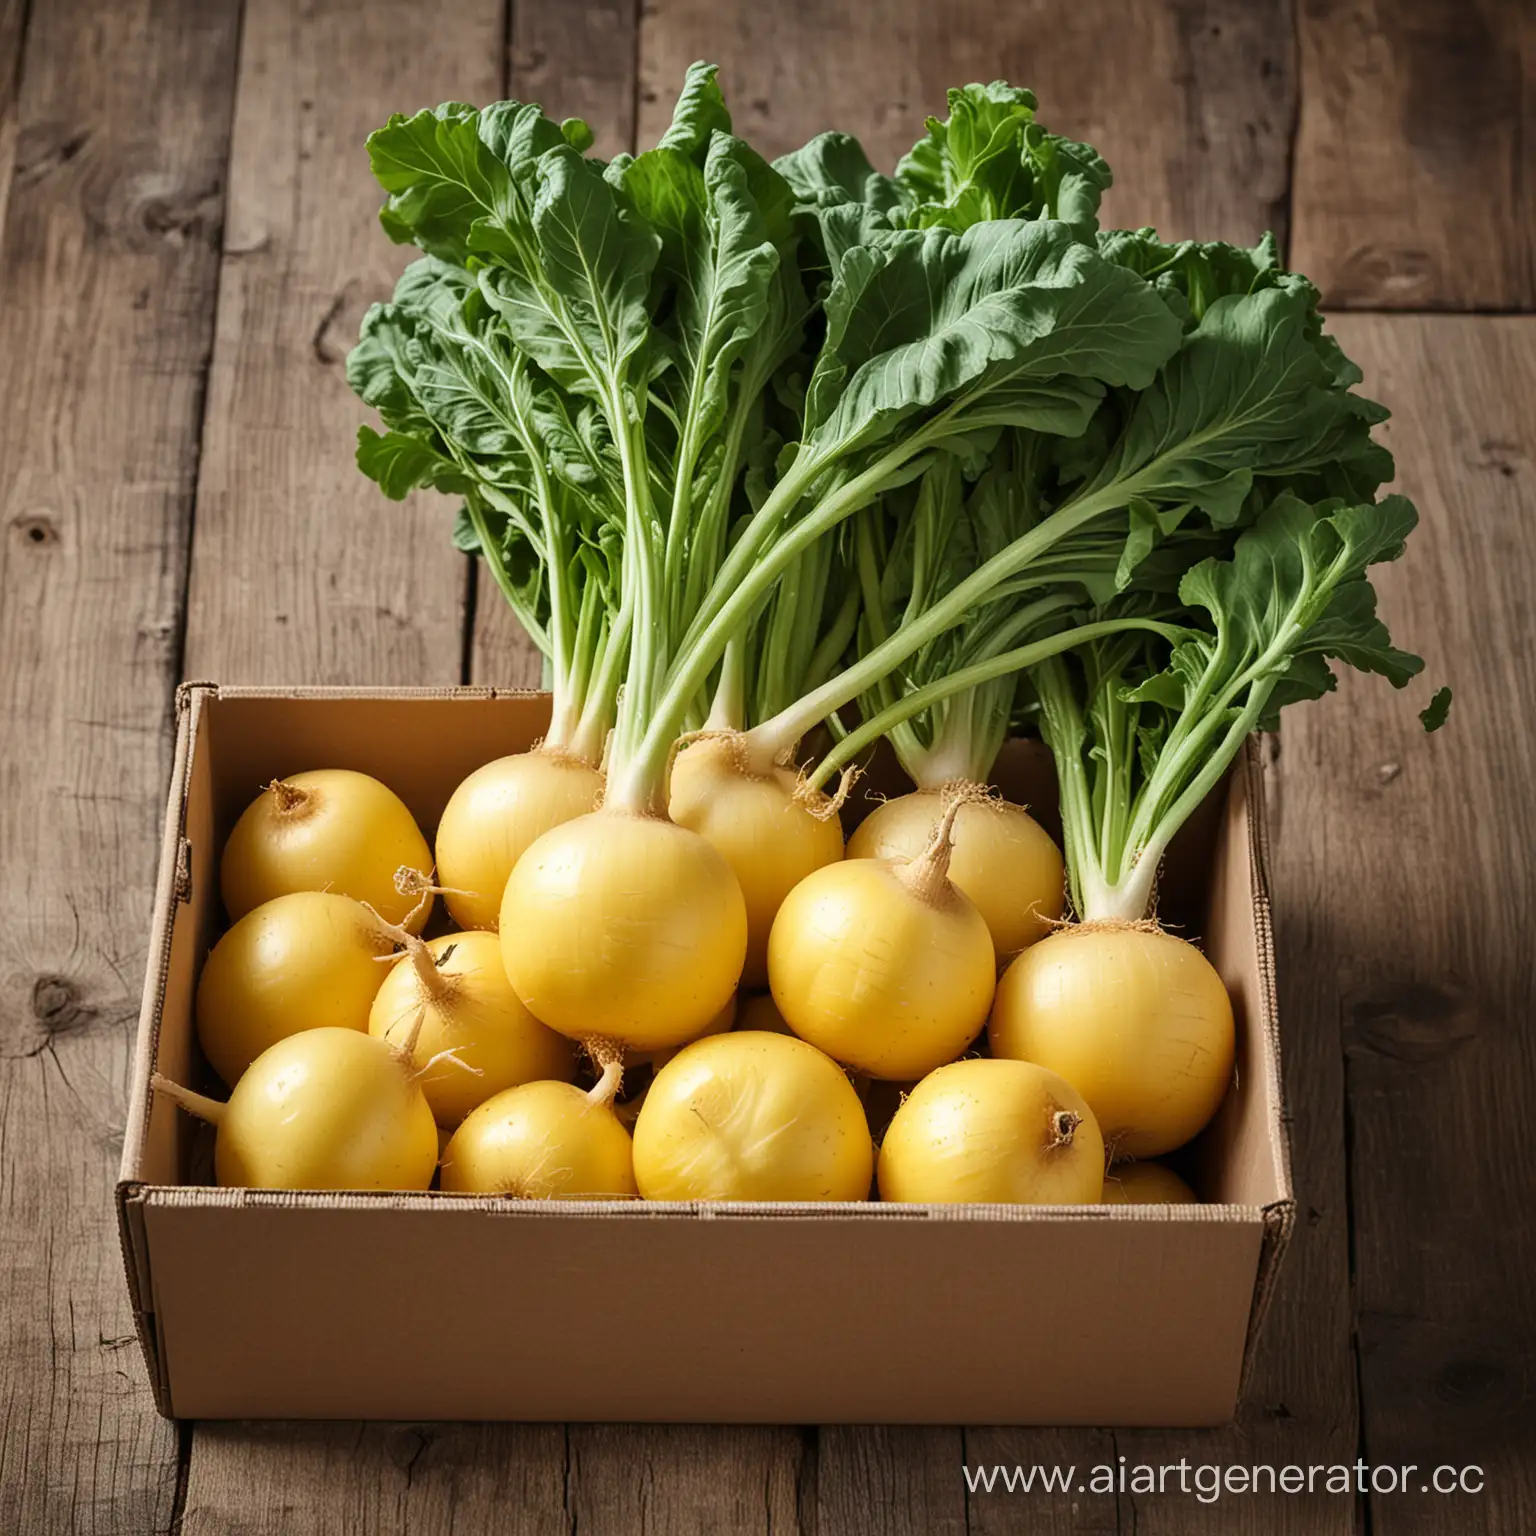 Vibrant-Yellow-Turnip-Displayed-in-a-Natural-Wicker-Basket